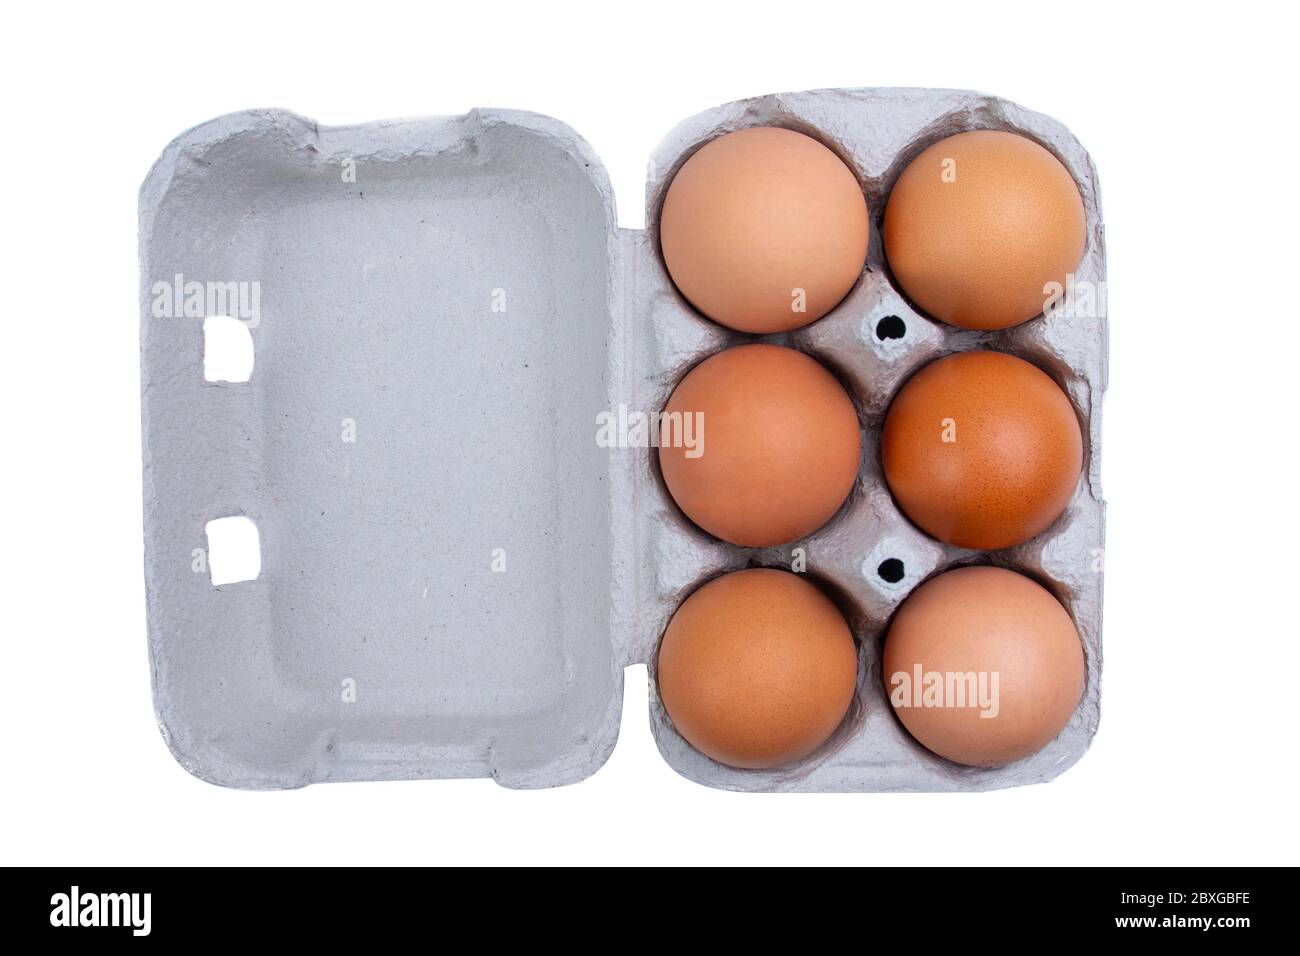 Isolated egg box package on white with lid and six brown eggs. Stock Photo